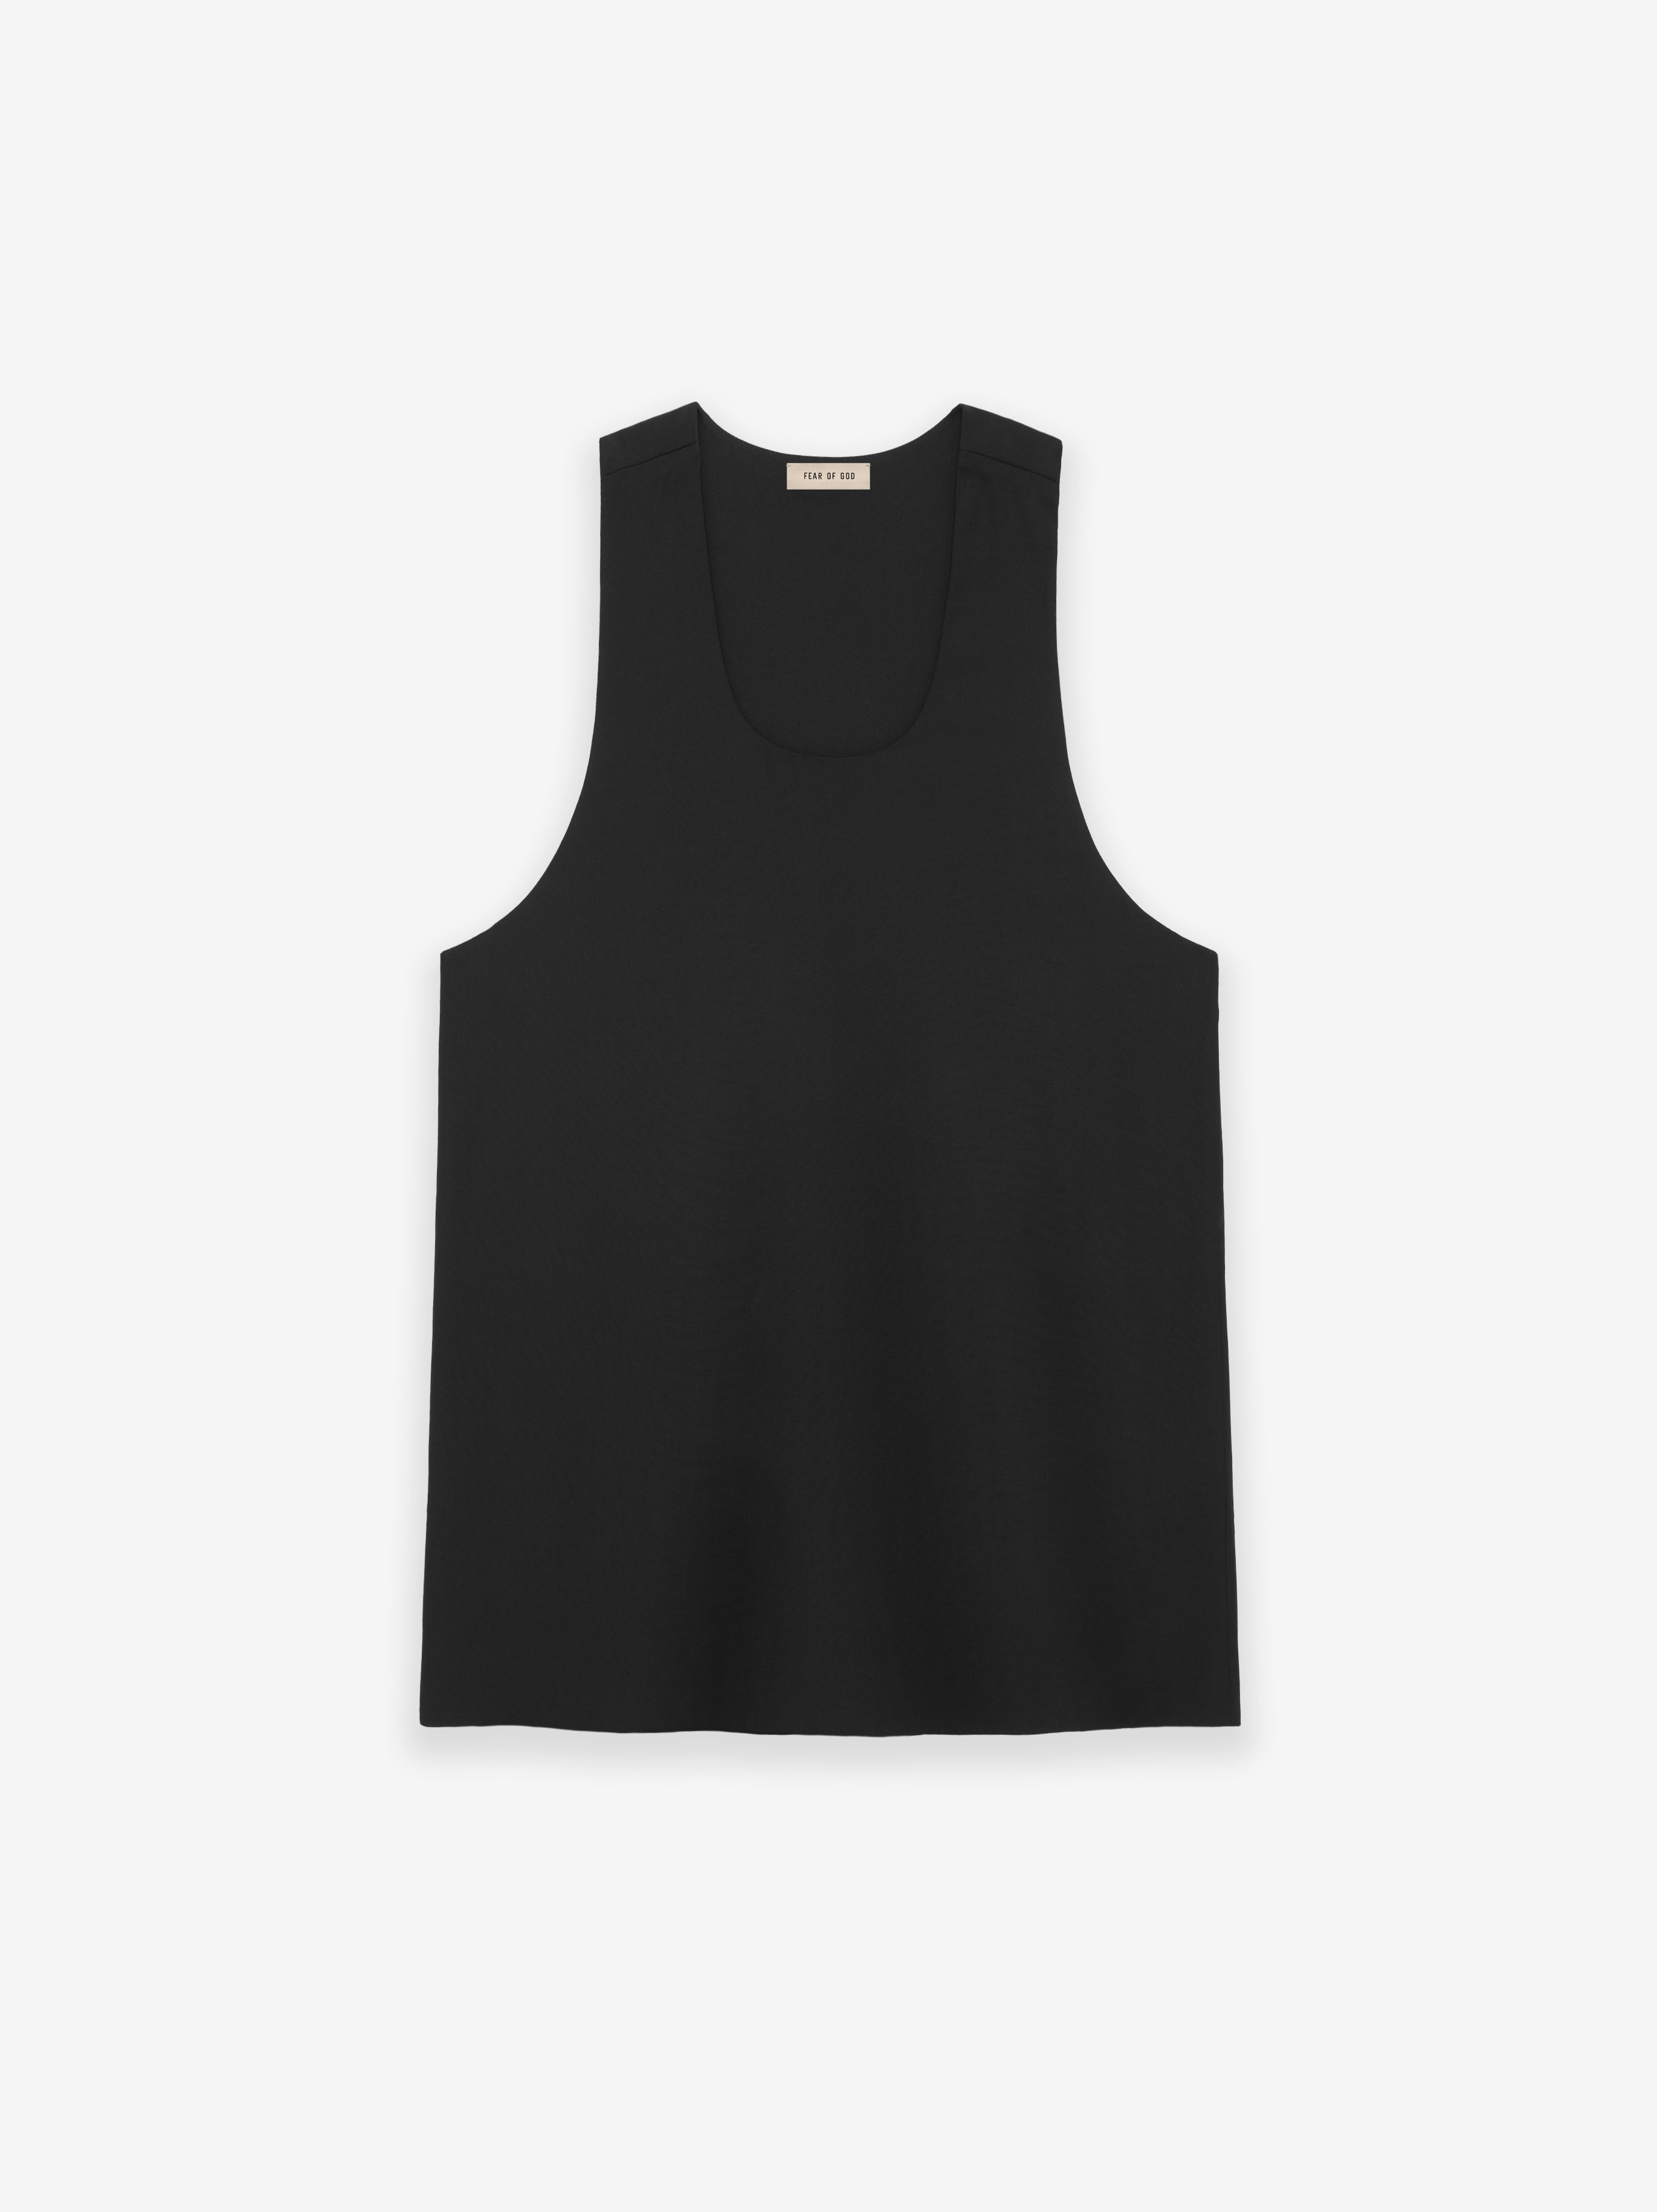 Double Layer Tank Top.